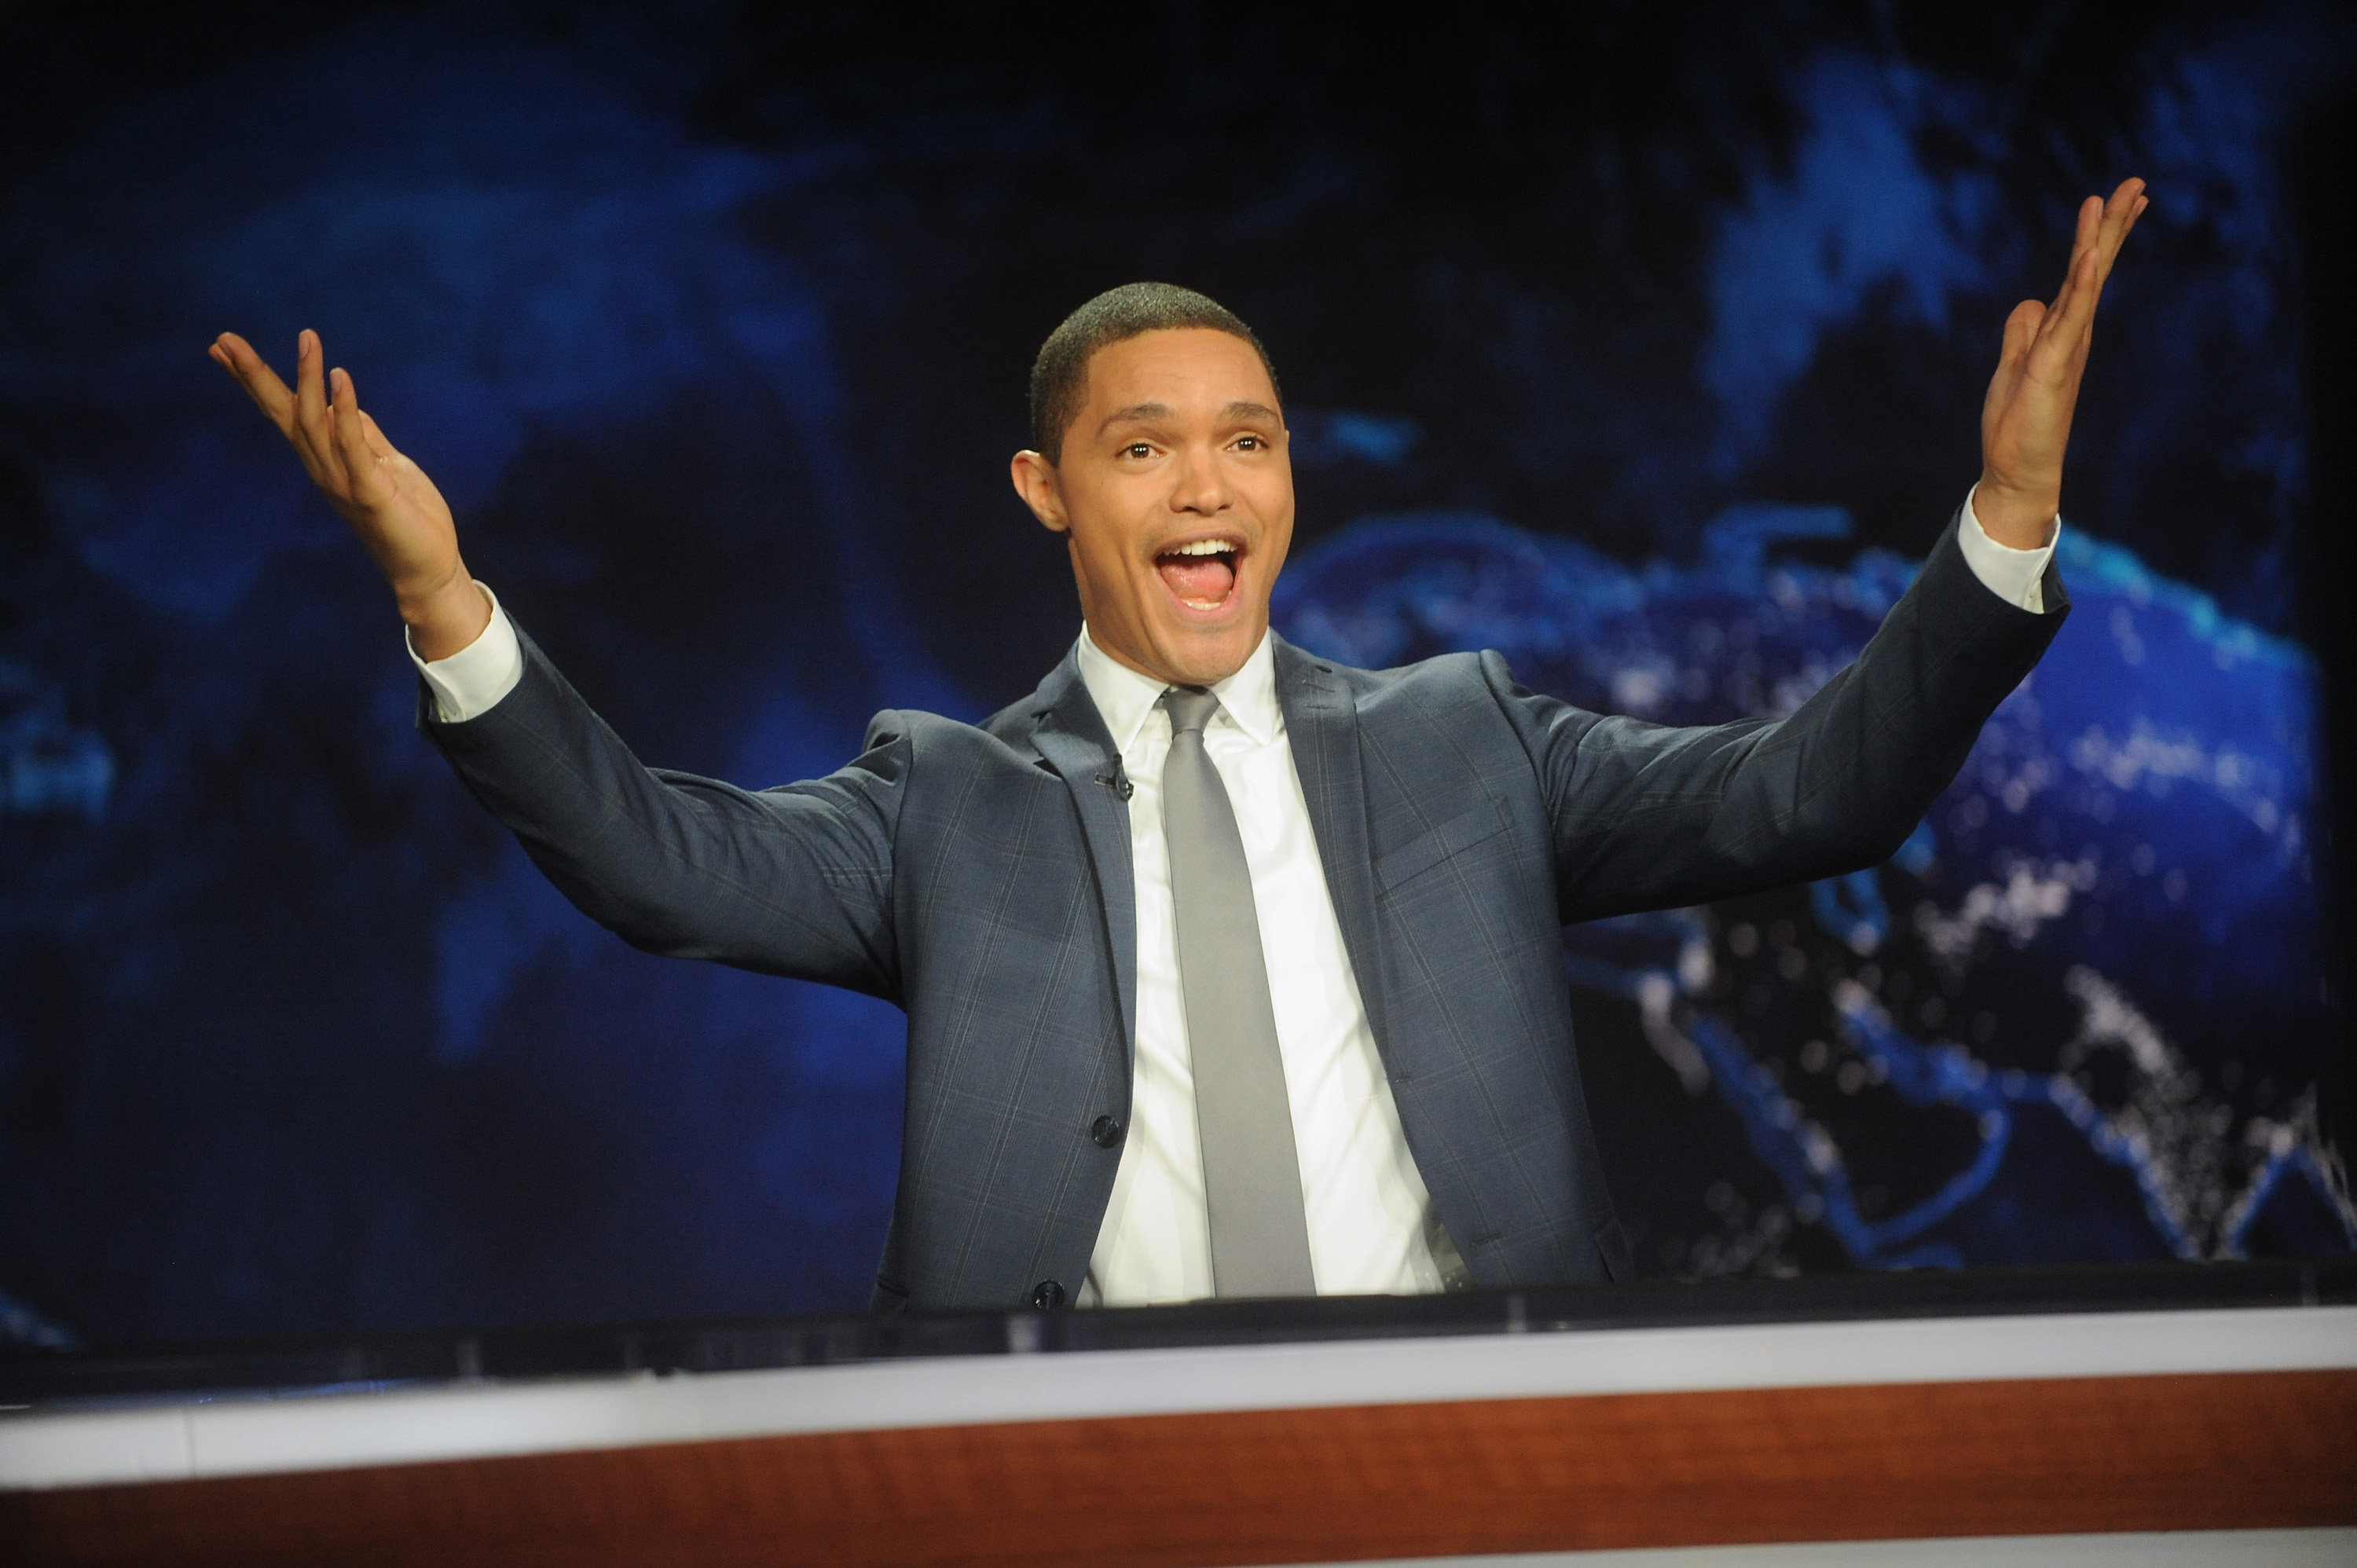 Trevor Noah hosts the <i>The Daily Show with Trevor Noah</i> in New York City, on Sept. 28, 2015. (Brad Barket—Getty Images)